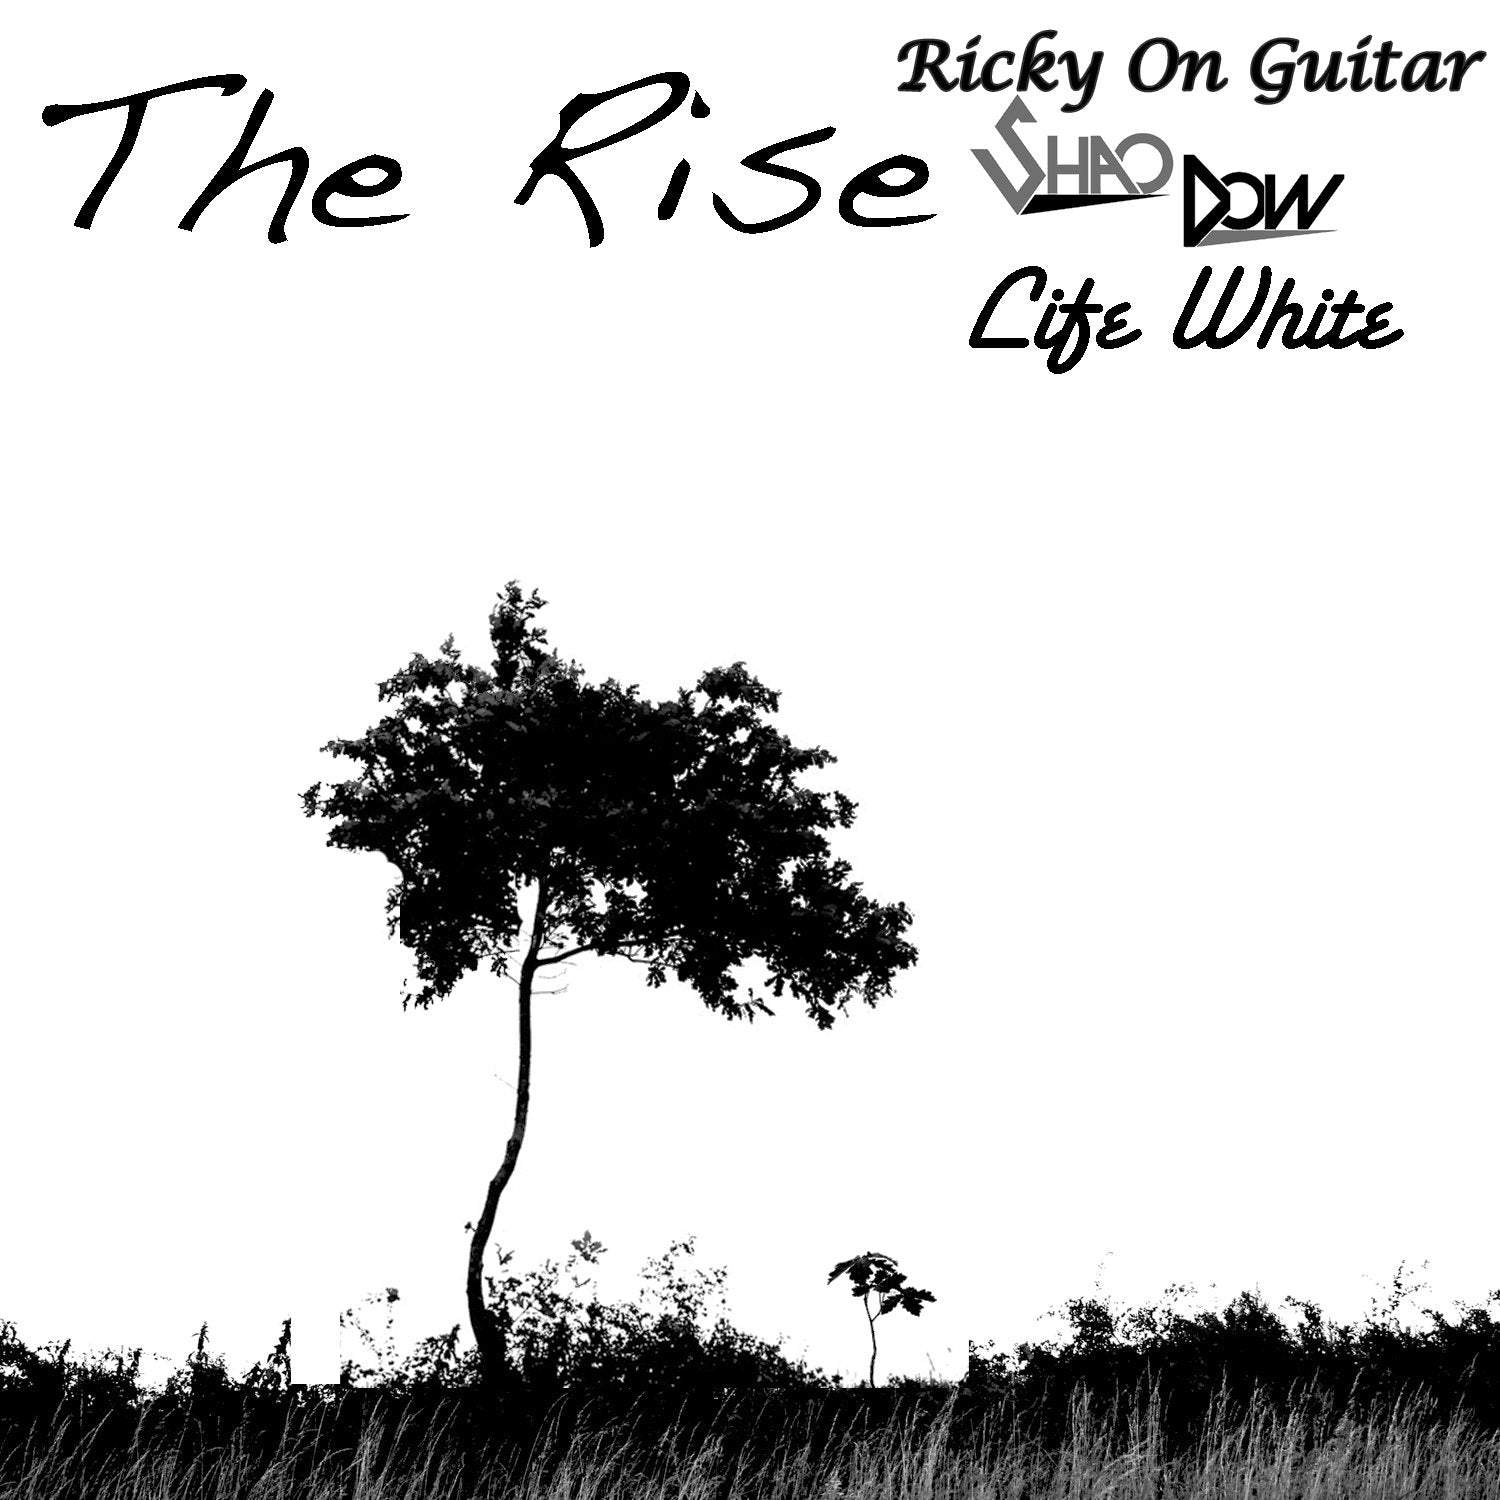 The Rise Single-Shao Dow - The DiY Gang Store-DiY Gang,Life White,Ricky On Guitar,ShaoDow,ShaoDow Album,Shaowdow,shoadow,Single,The Rise,The Rise Single